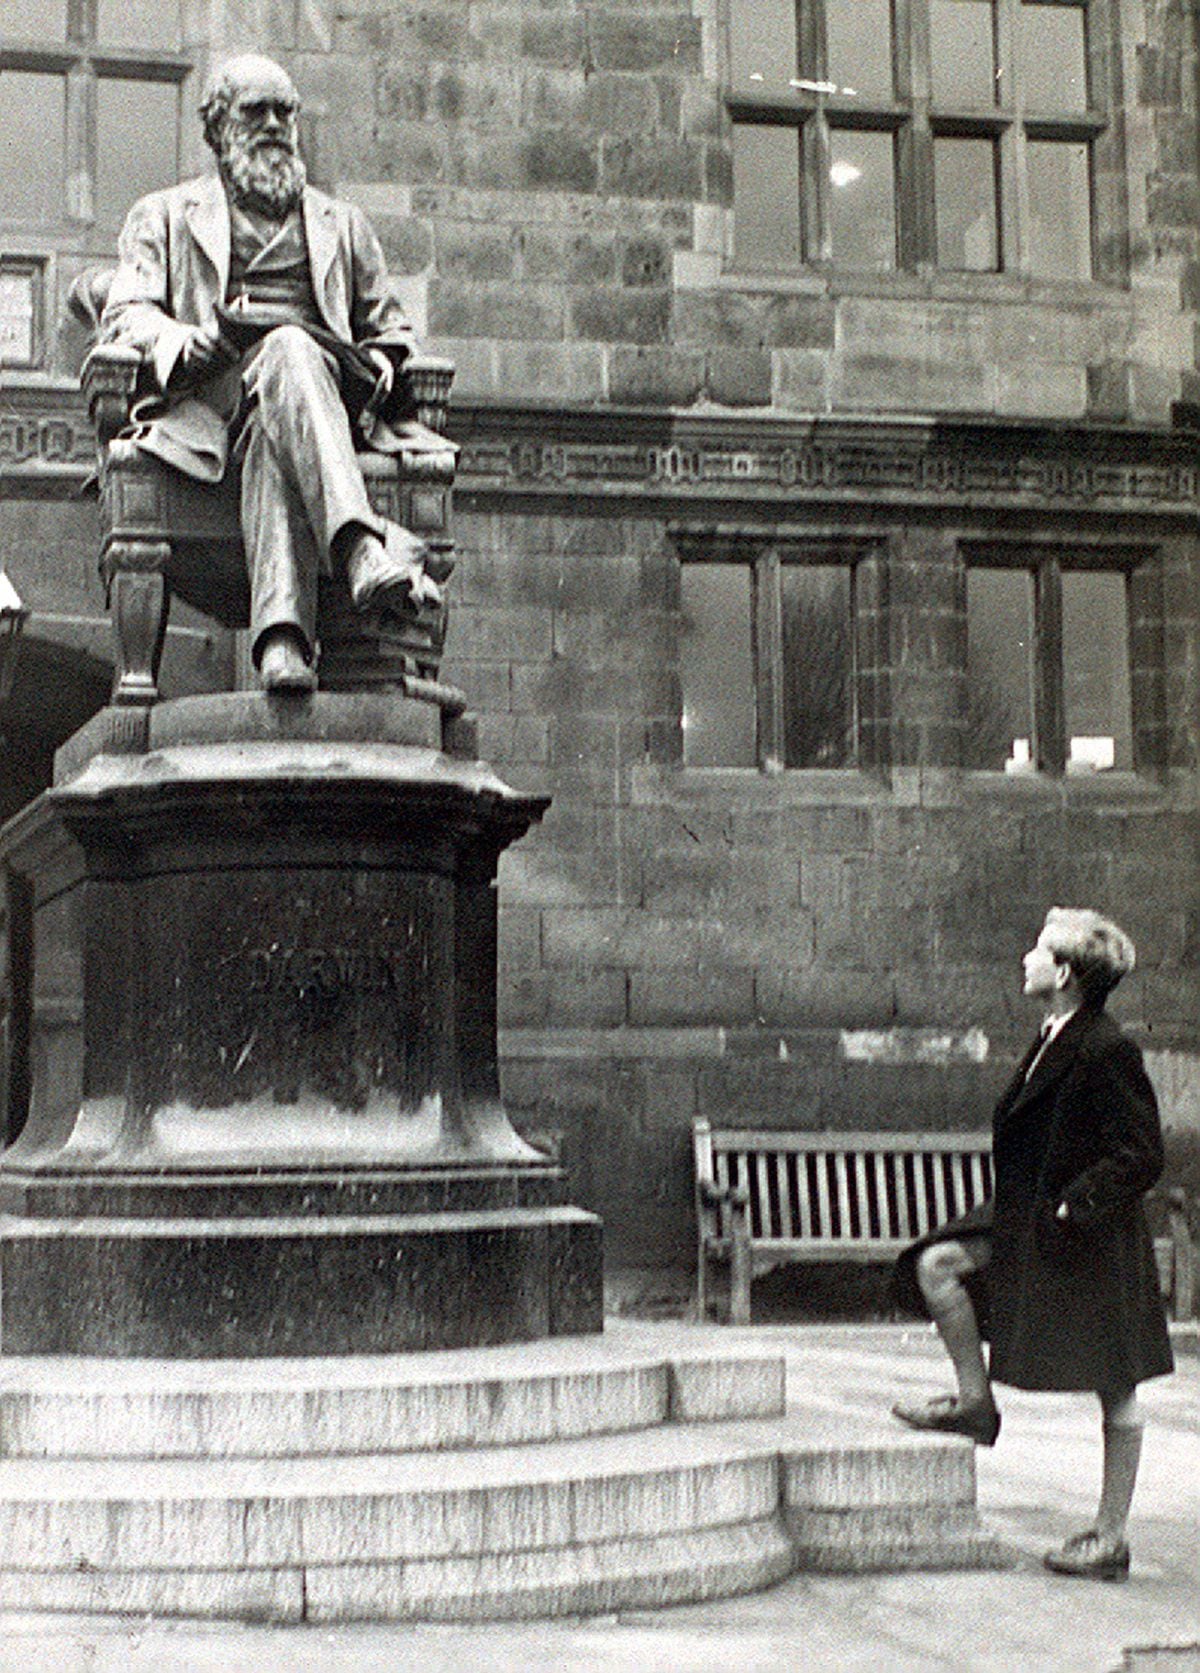 The Charles Darwin statue in Shrewsbury, pictured on February 1, 1949, being admired by John Howard Davies, who played the title role in a 1948 Oliver Twist movie.